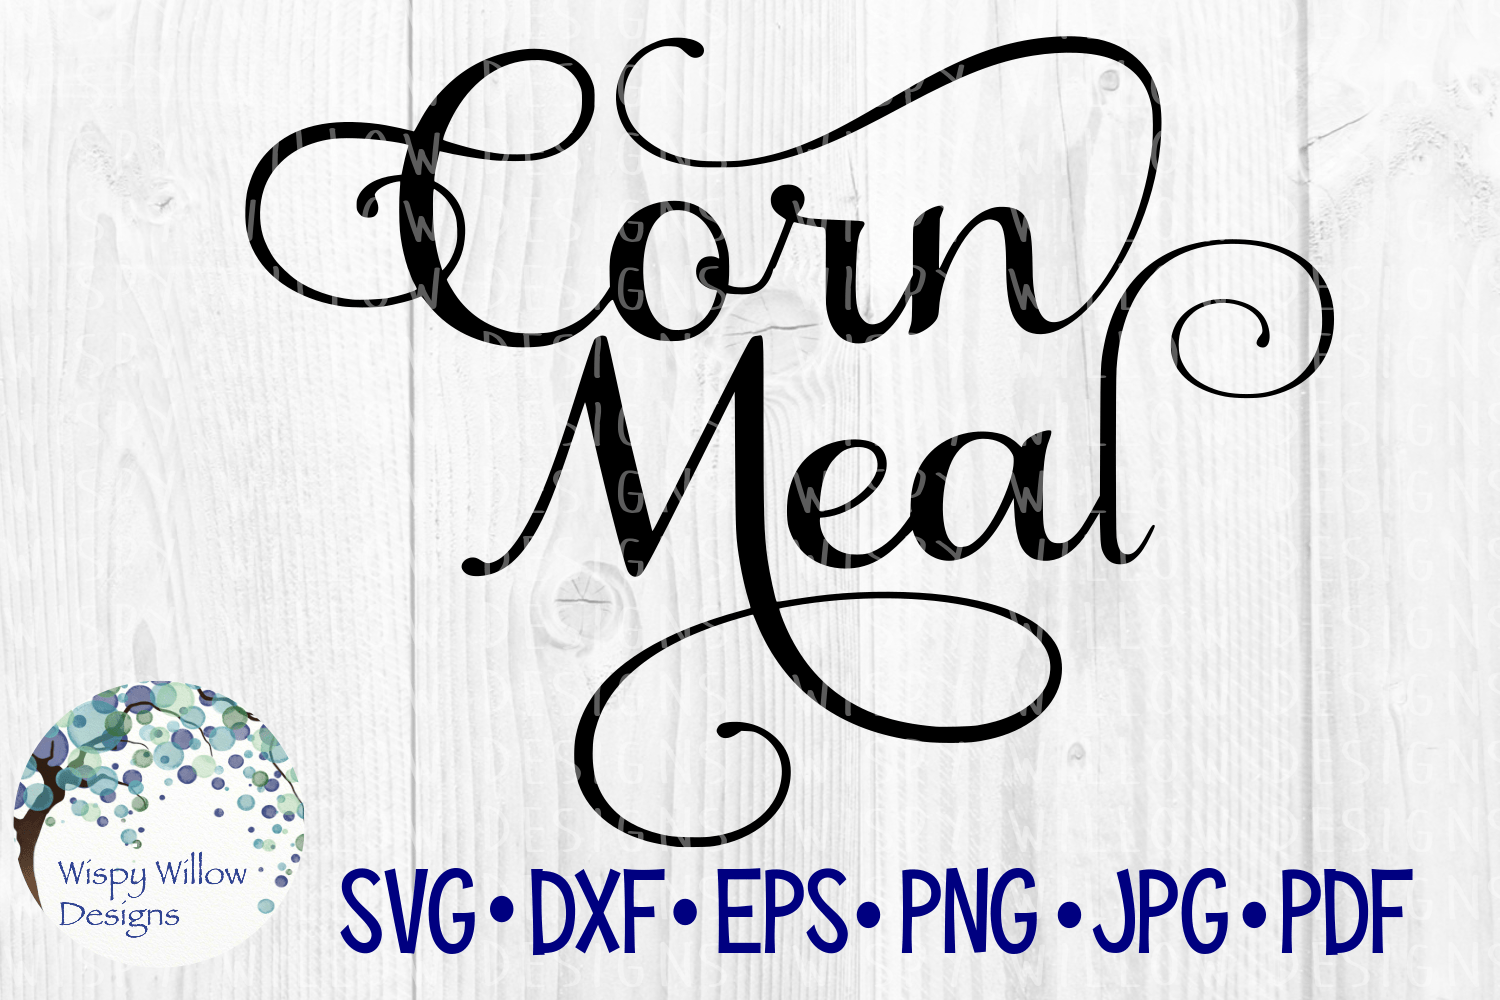 Corn Meal SVG | Kitchen Pantry Label Wispy Willow Designs Company